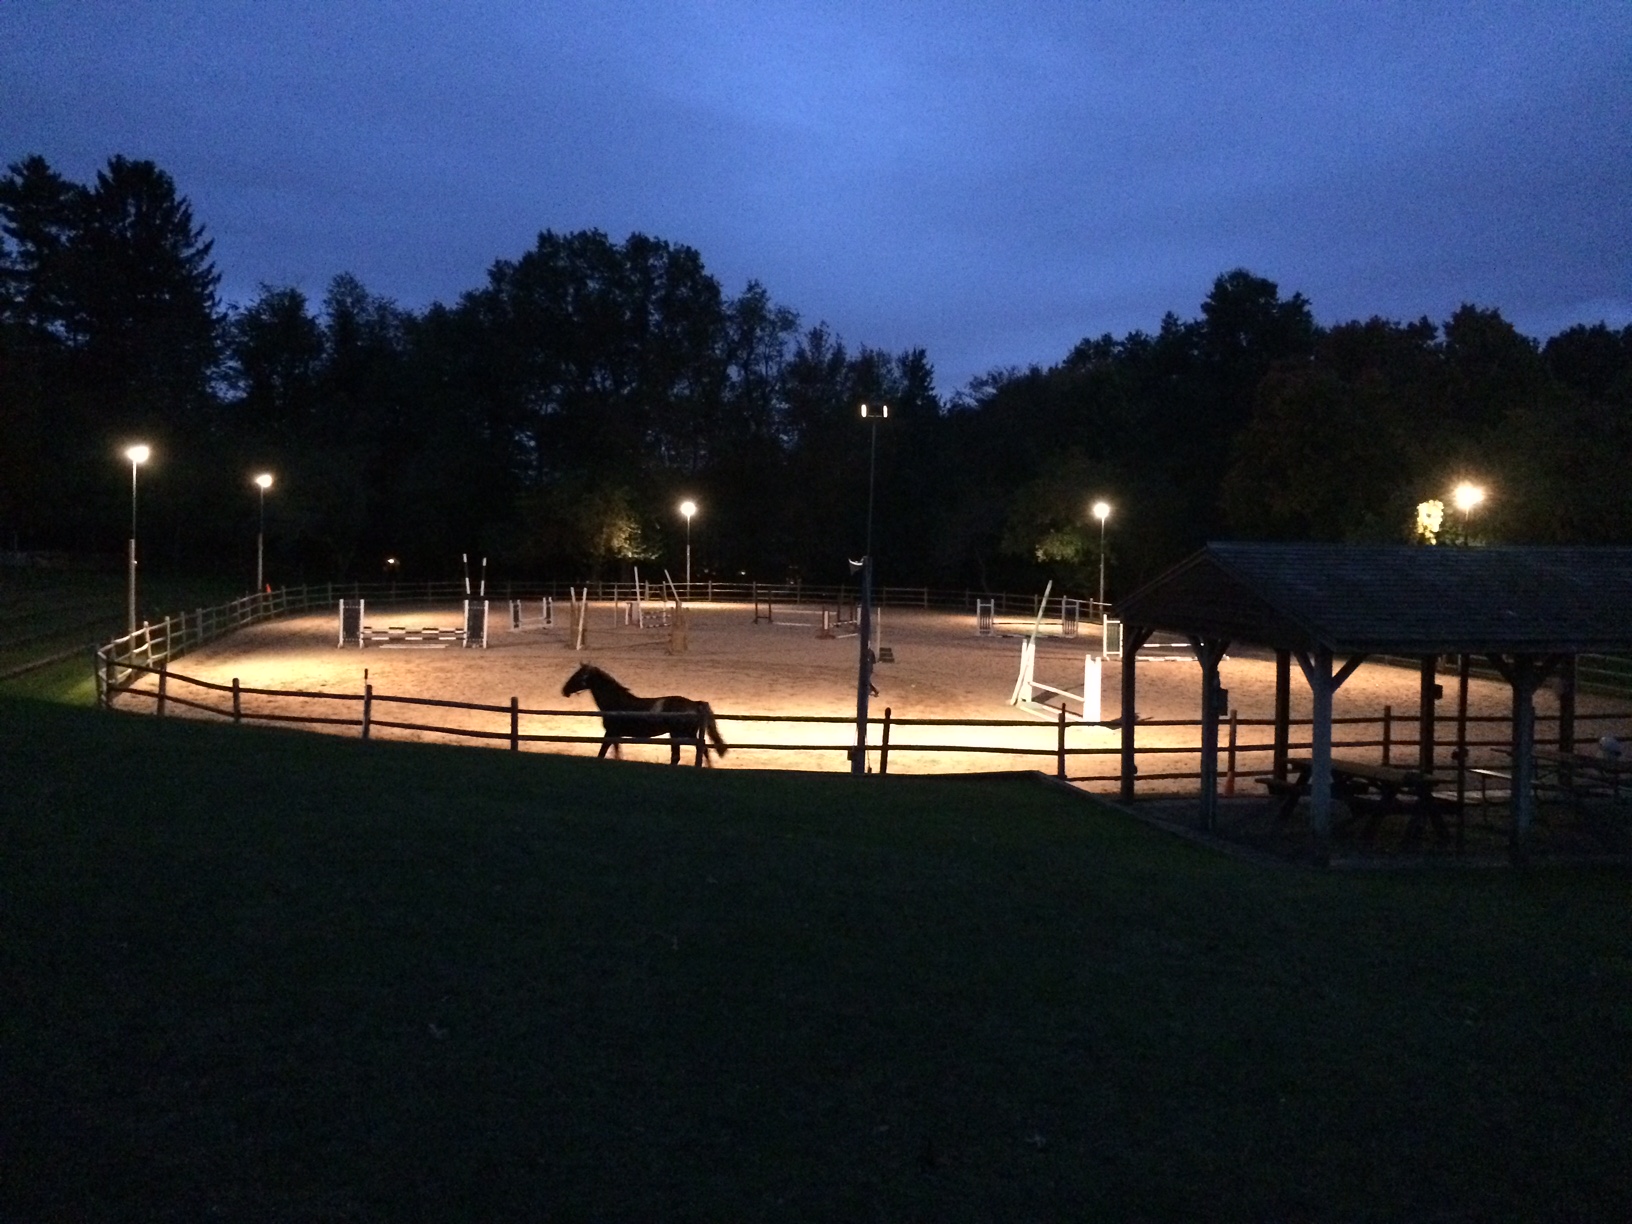 Horse runs in a lighted riding ring